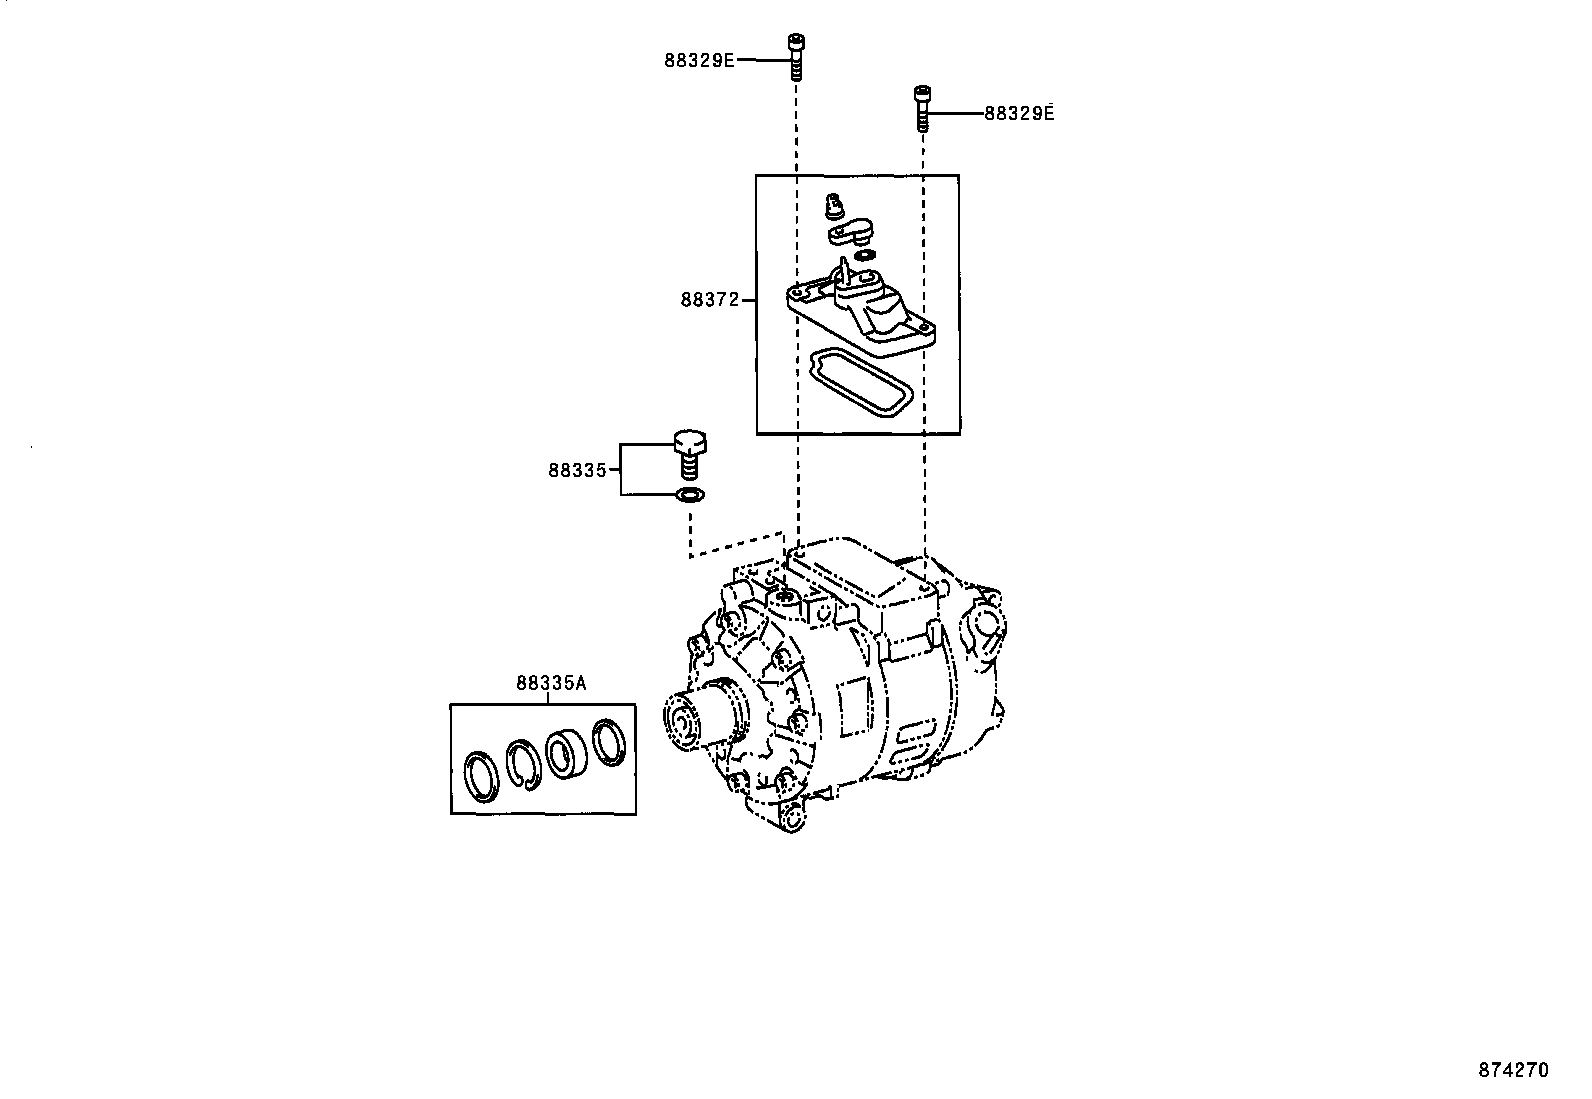  GS300 430 |  HEATING AIR CONDITIONING COMPRESSOR